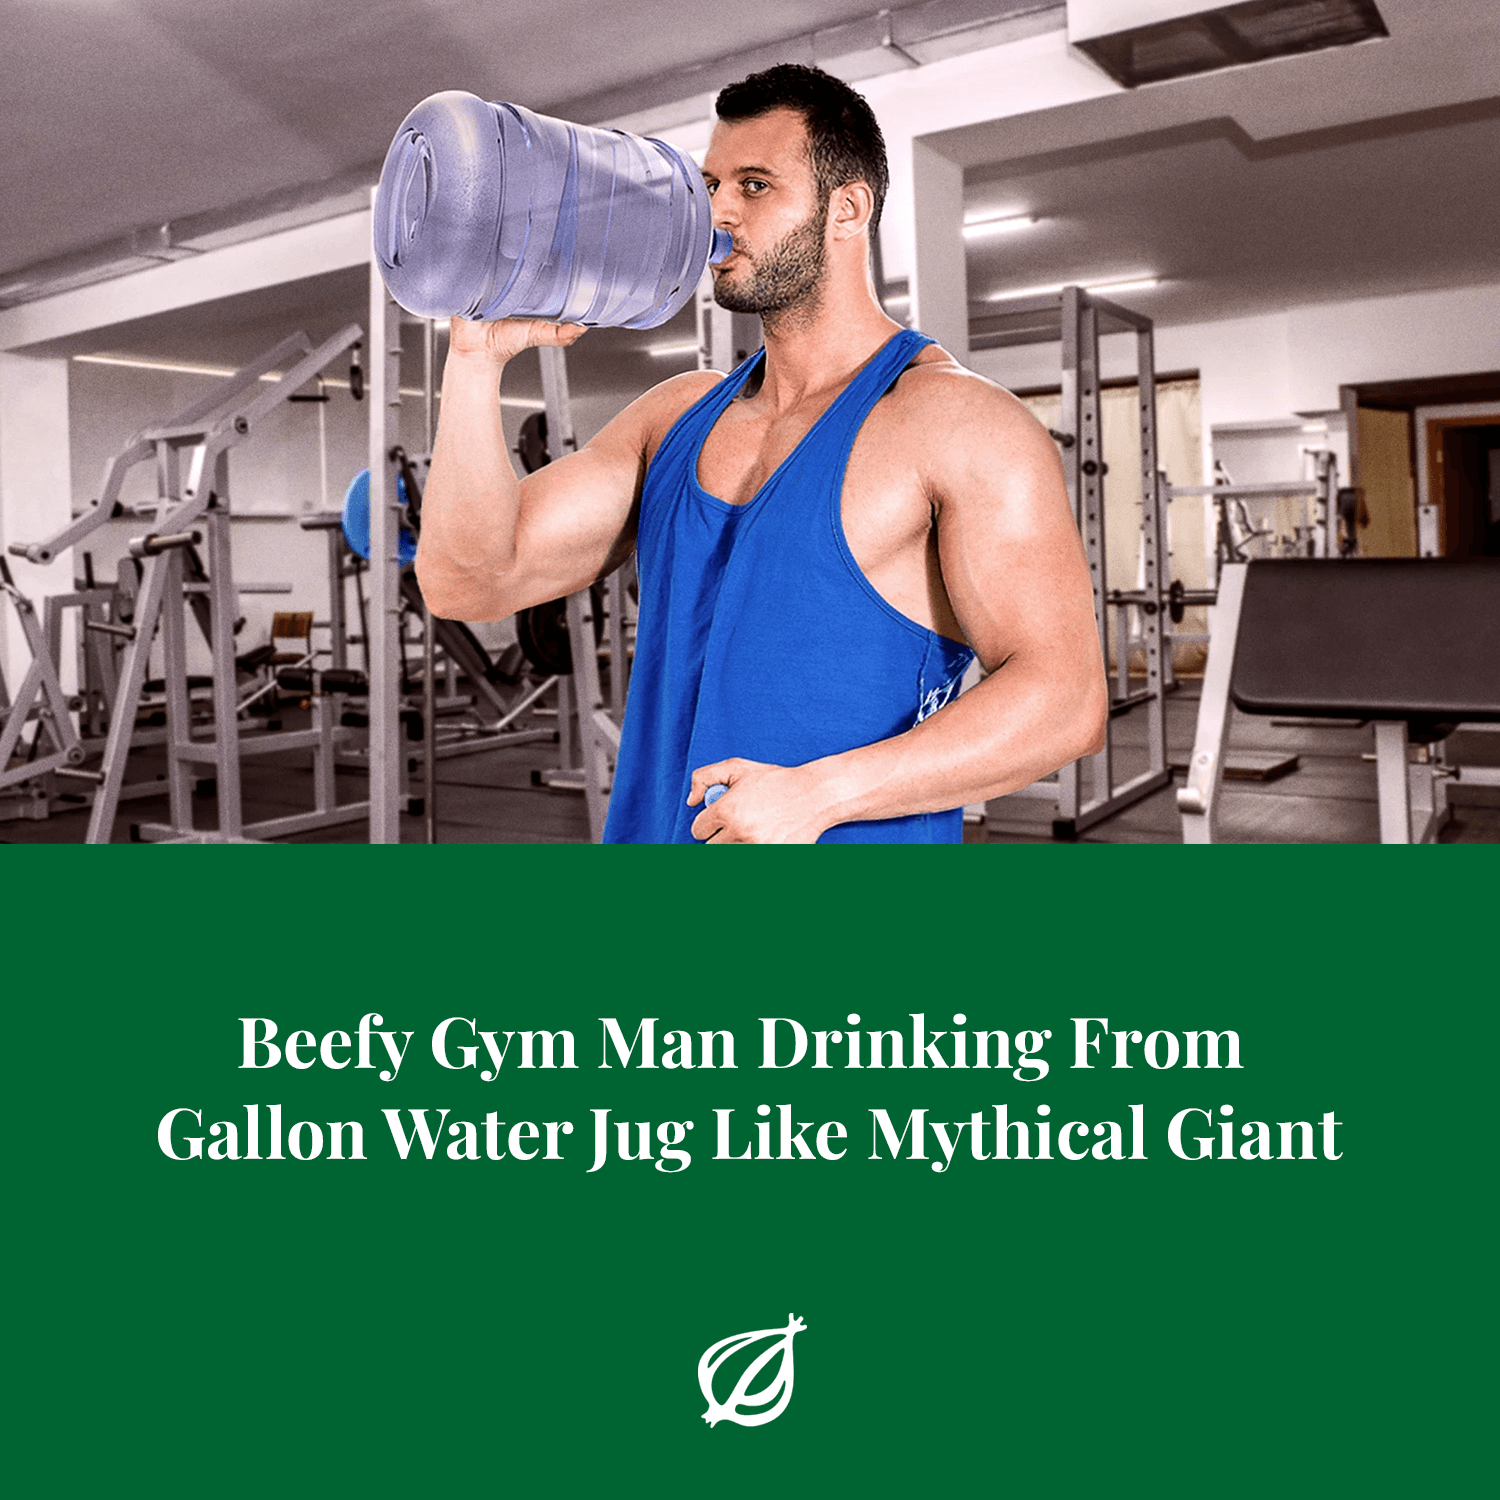 Beefy Gym Man Drinking From Gallon Water Jug Like Mythical Giant